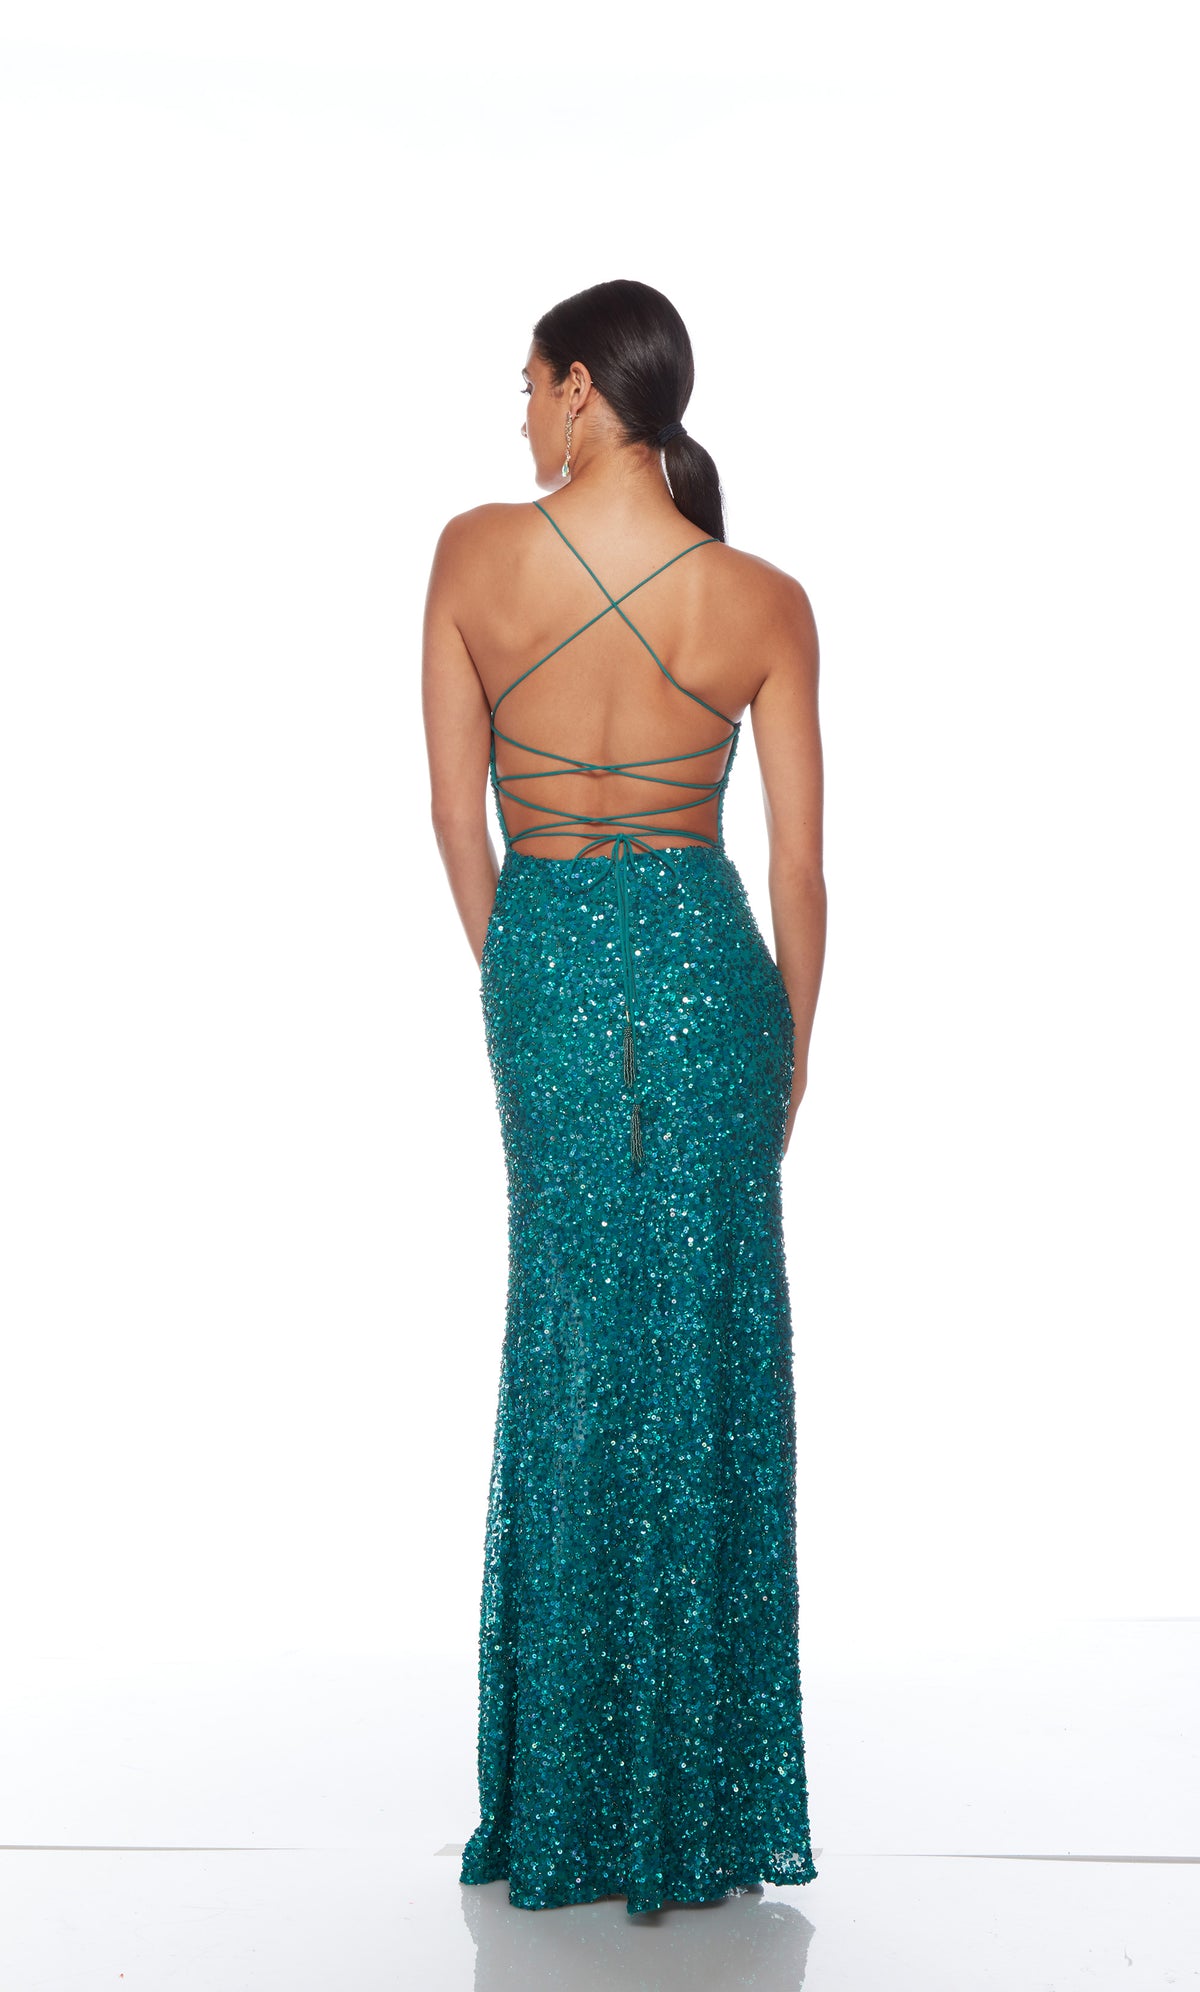 Blue-green sequin gown with scooped neckline, slit, and strappy lace-up back for an elegant and alluring look.